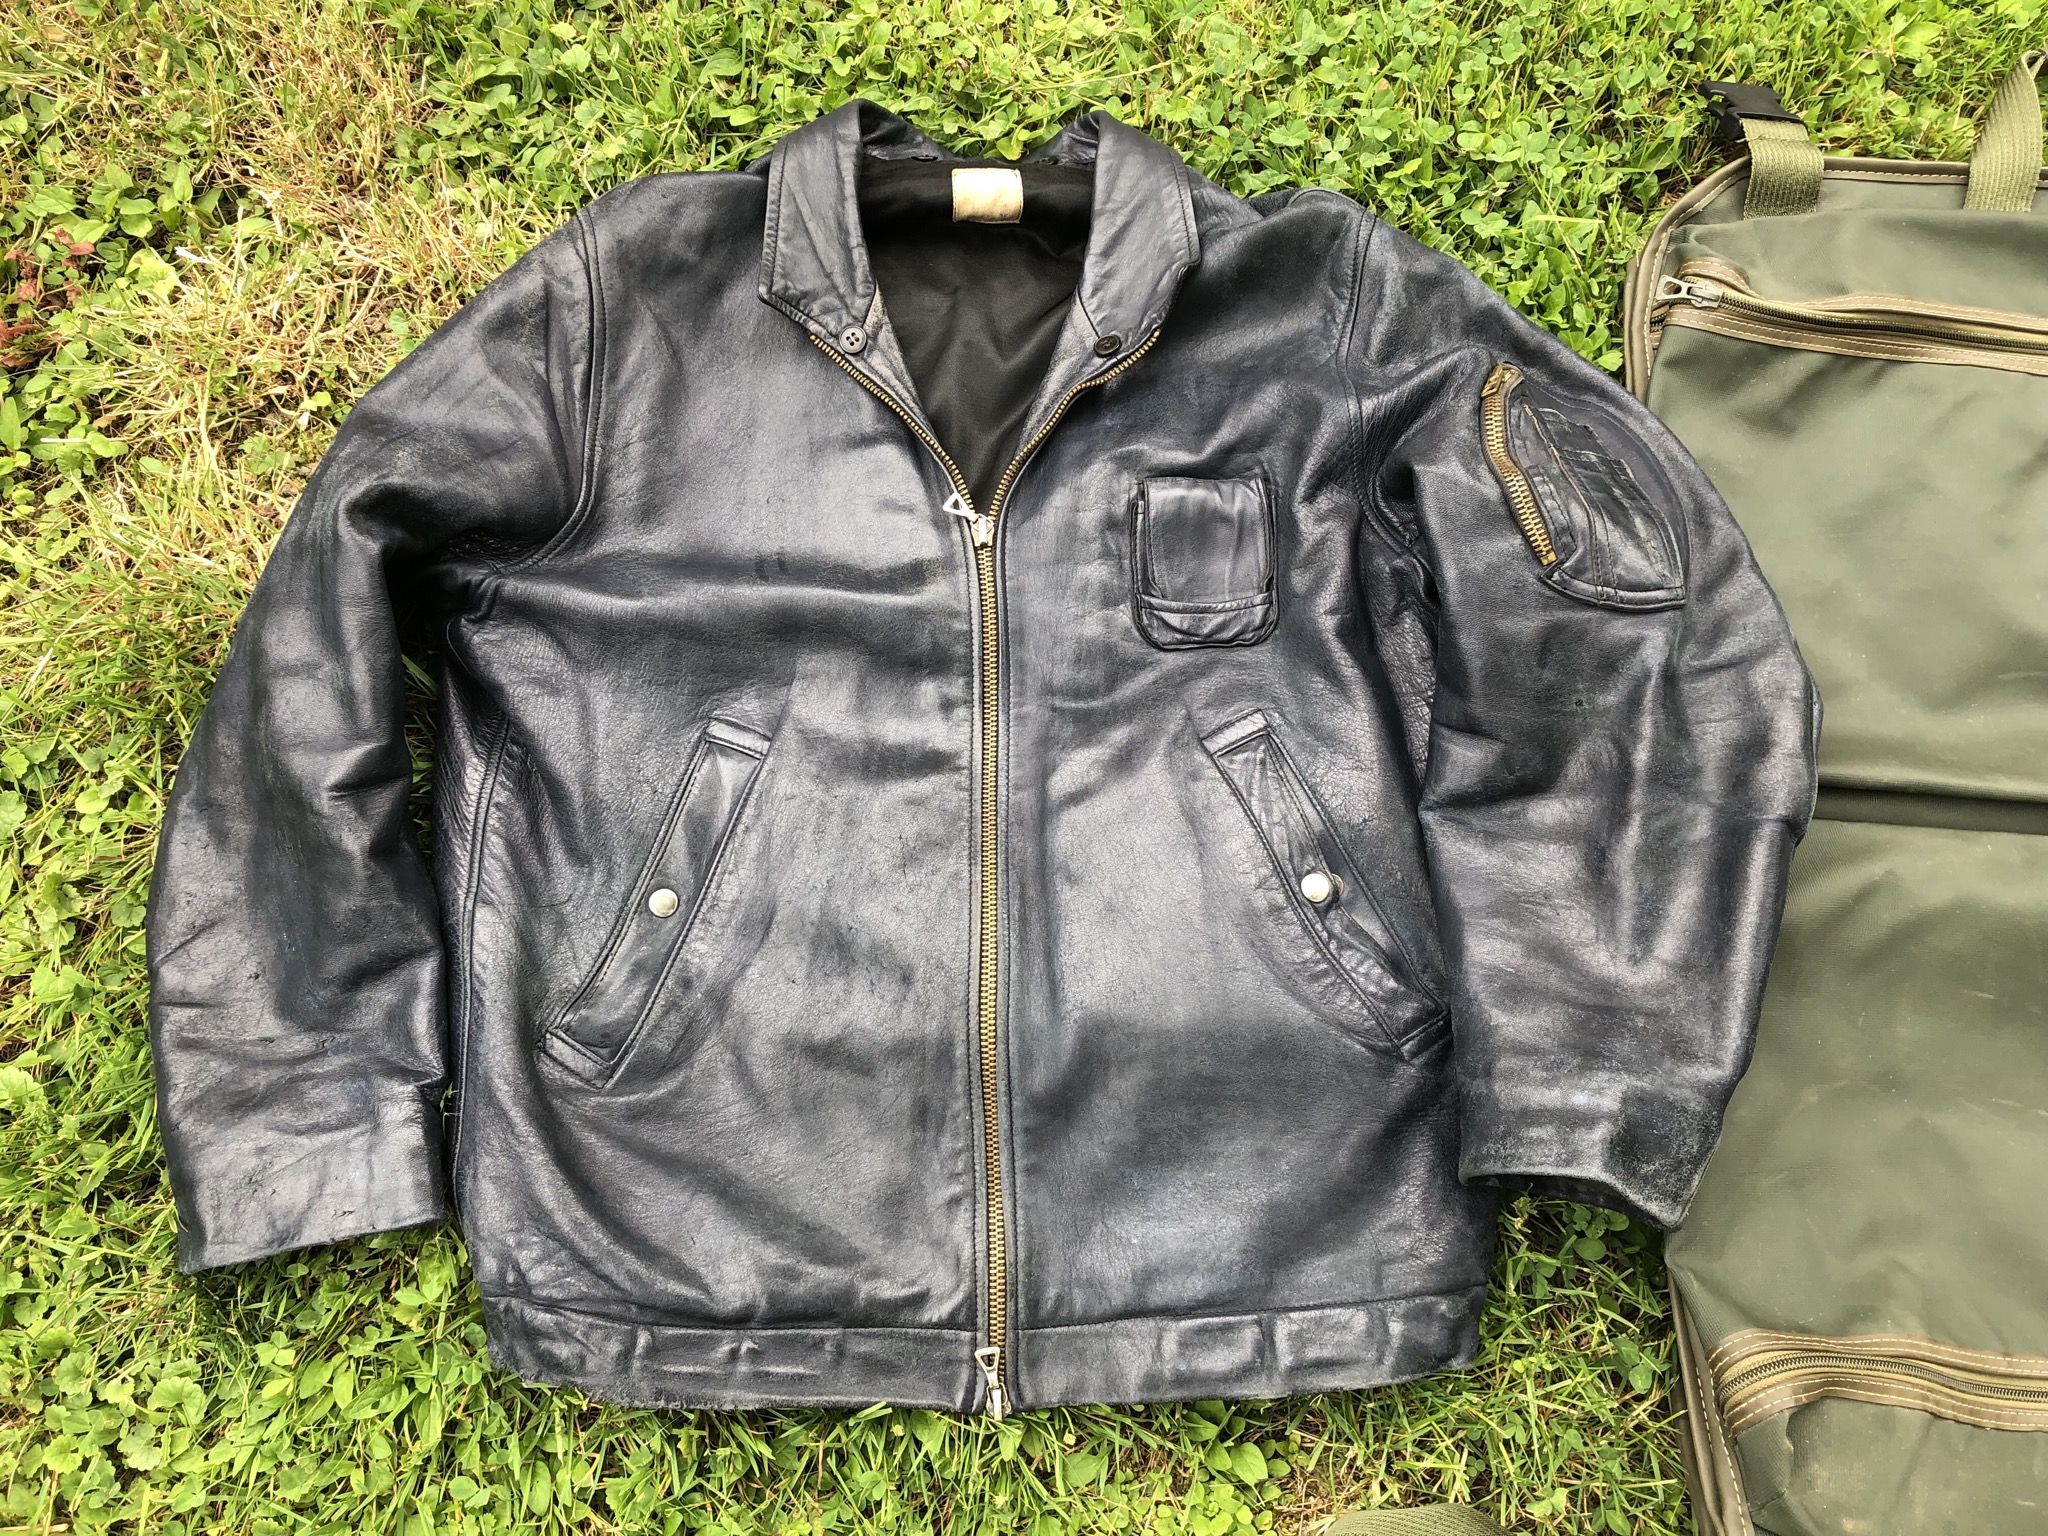 French repro | Vintage Leather Jackets Forum